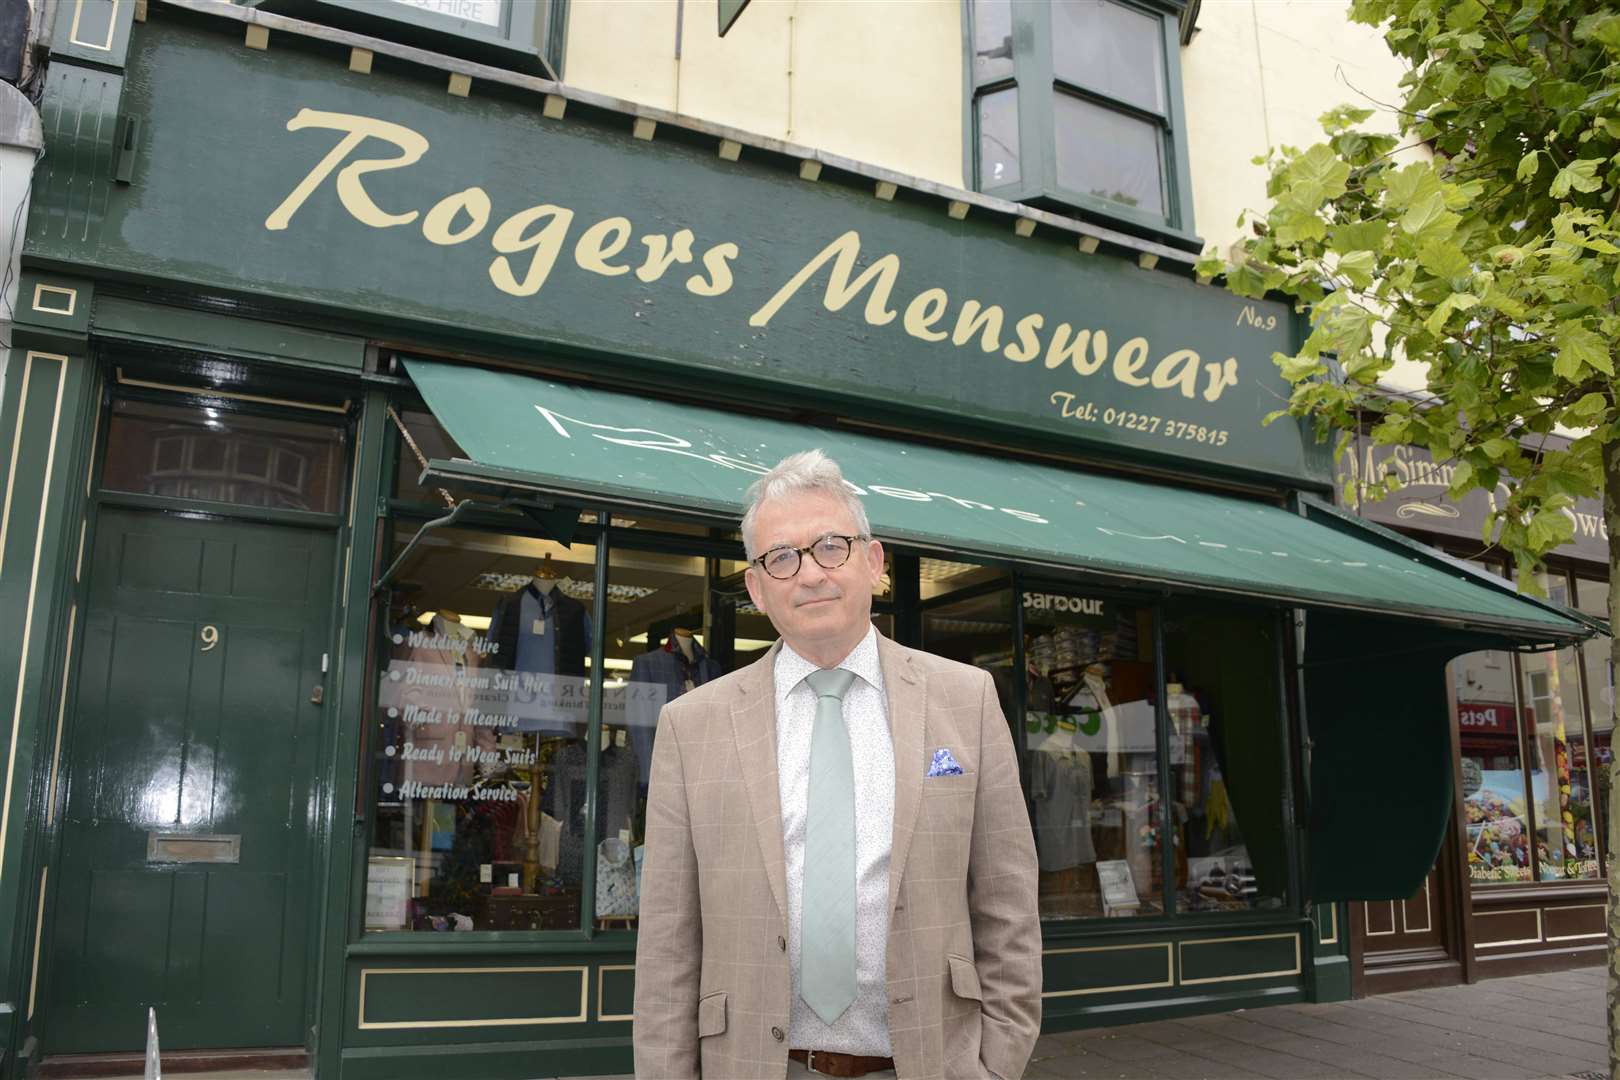 Roger's Menswear owner Tony Symons says barring someone who came in without a mask would “create a confrontation”